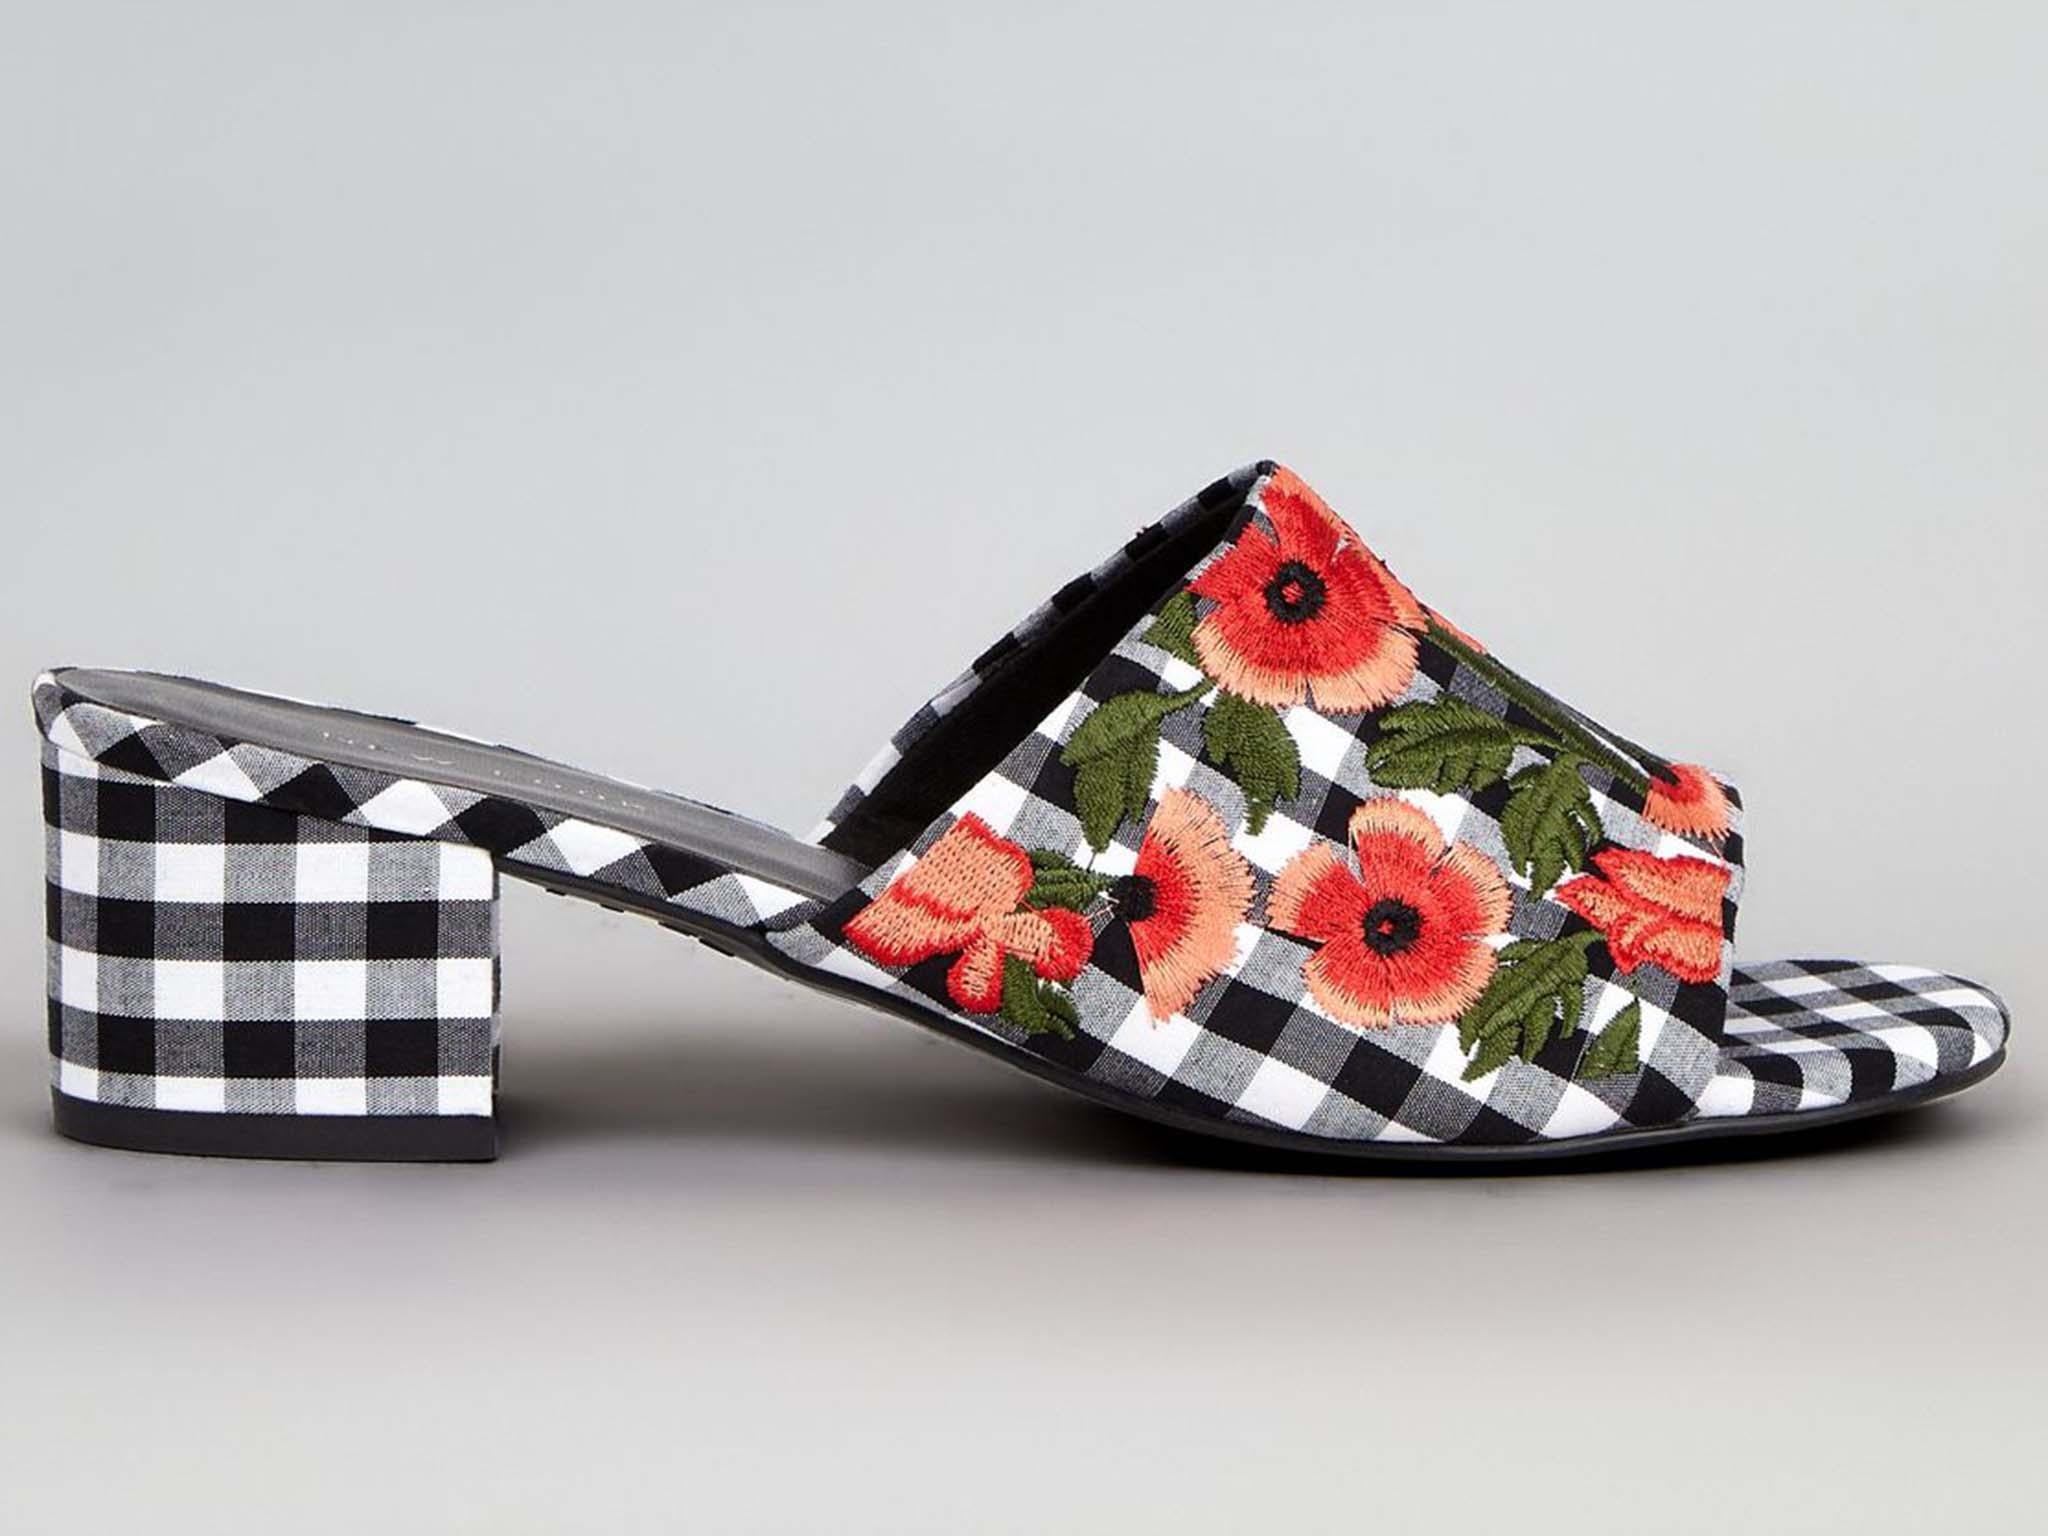 Gingham Floral Embroidered Mules, £25.99, New Look